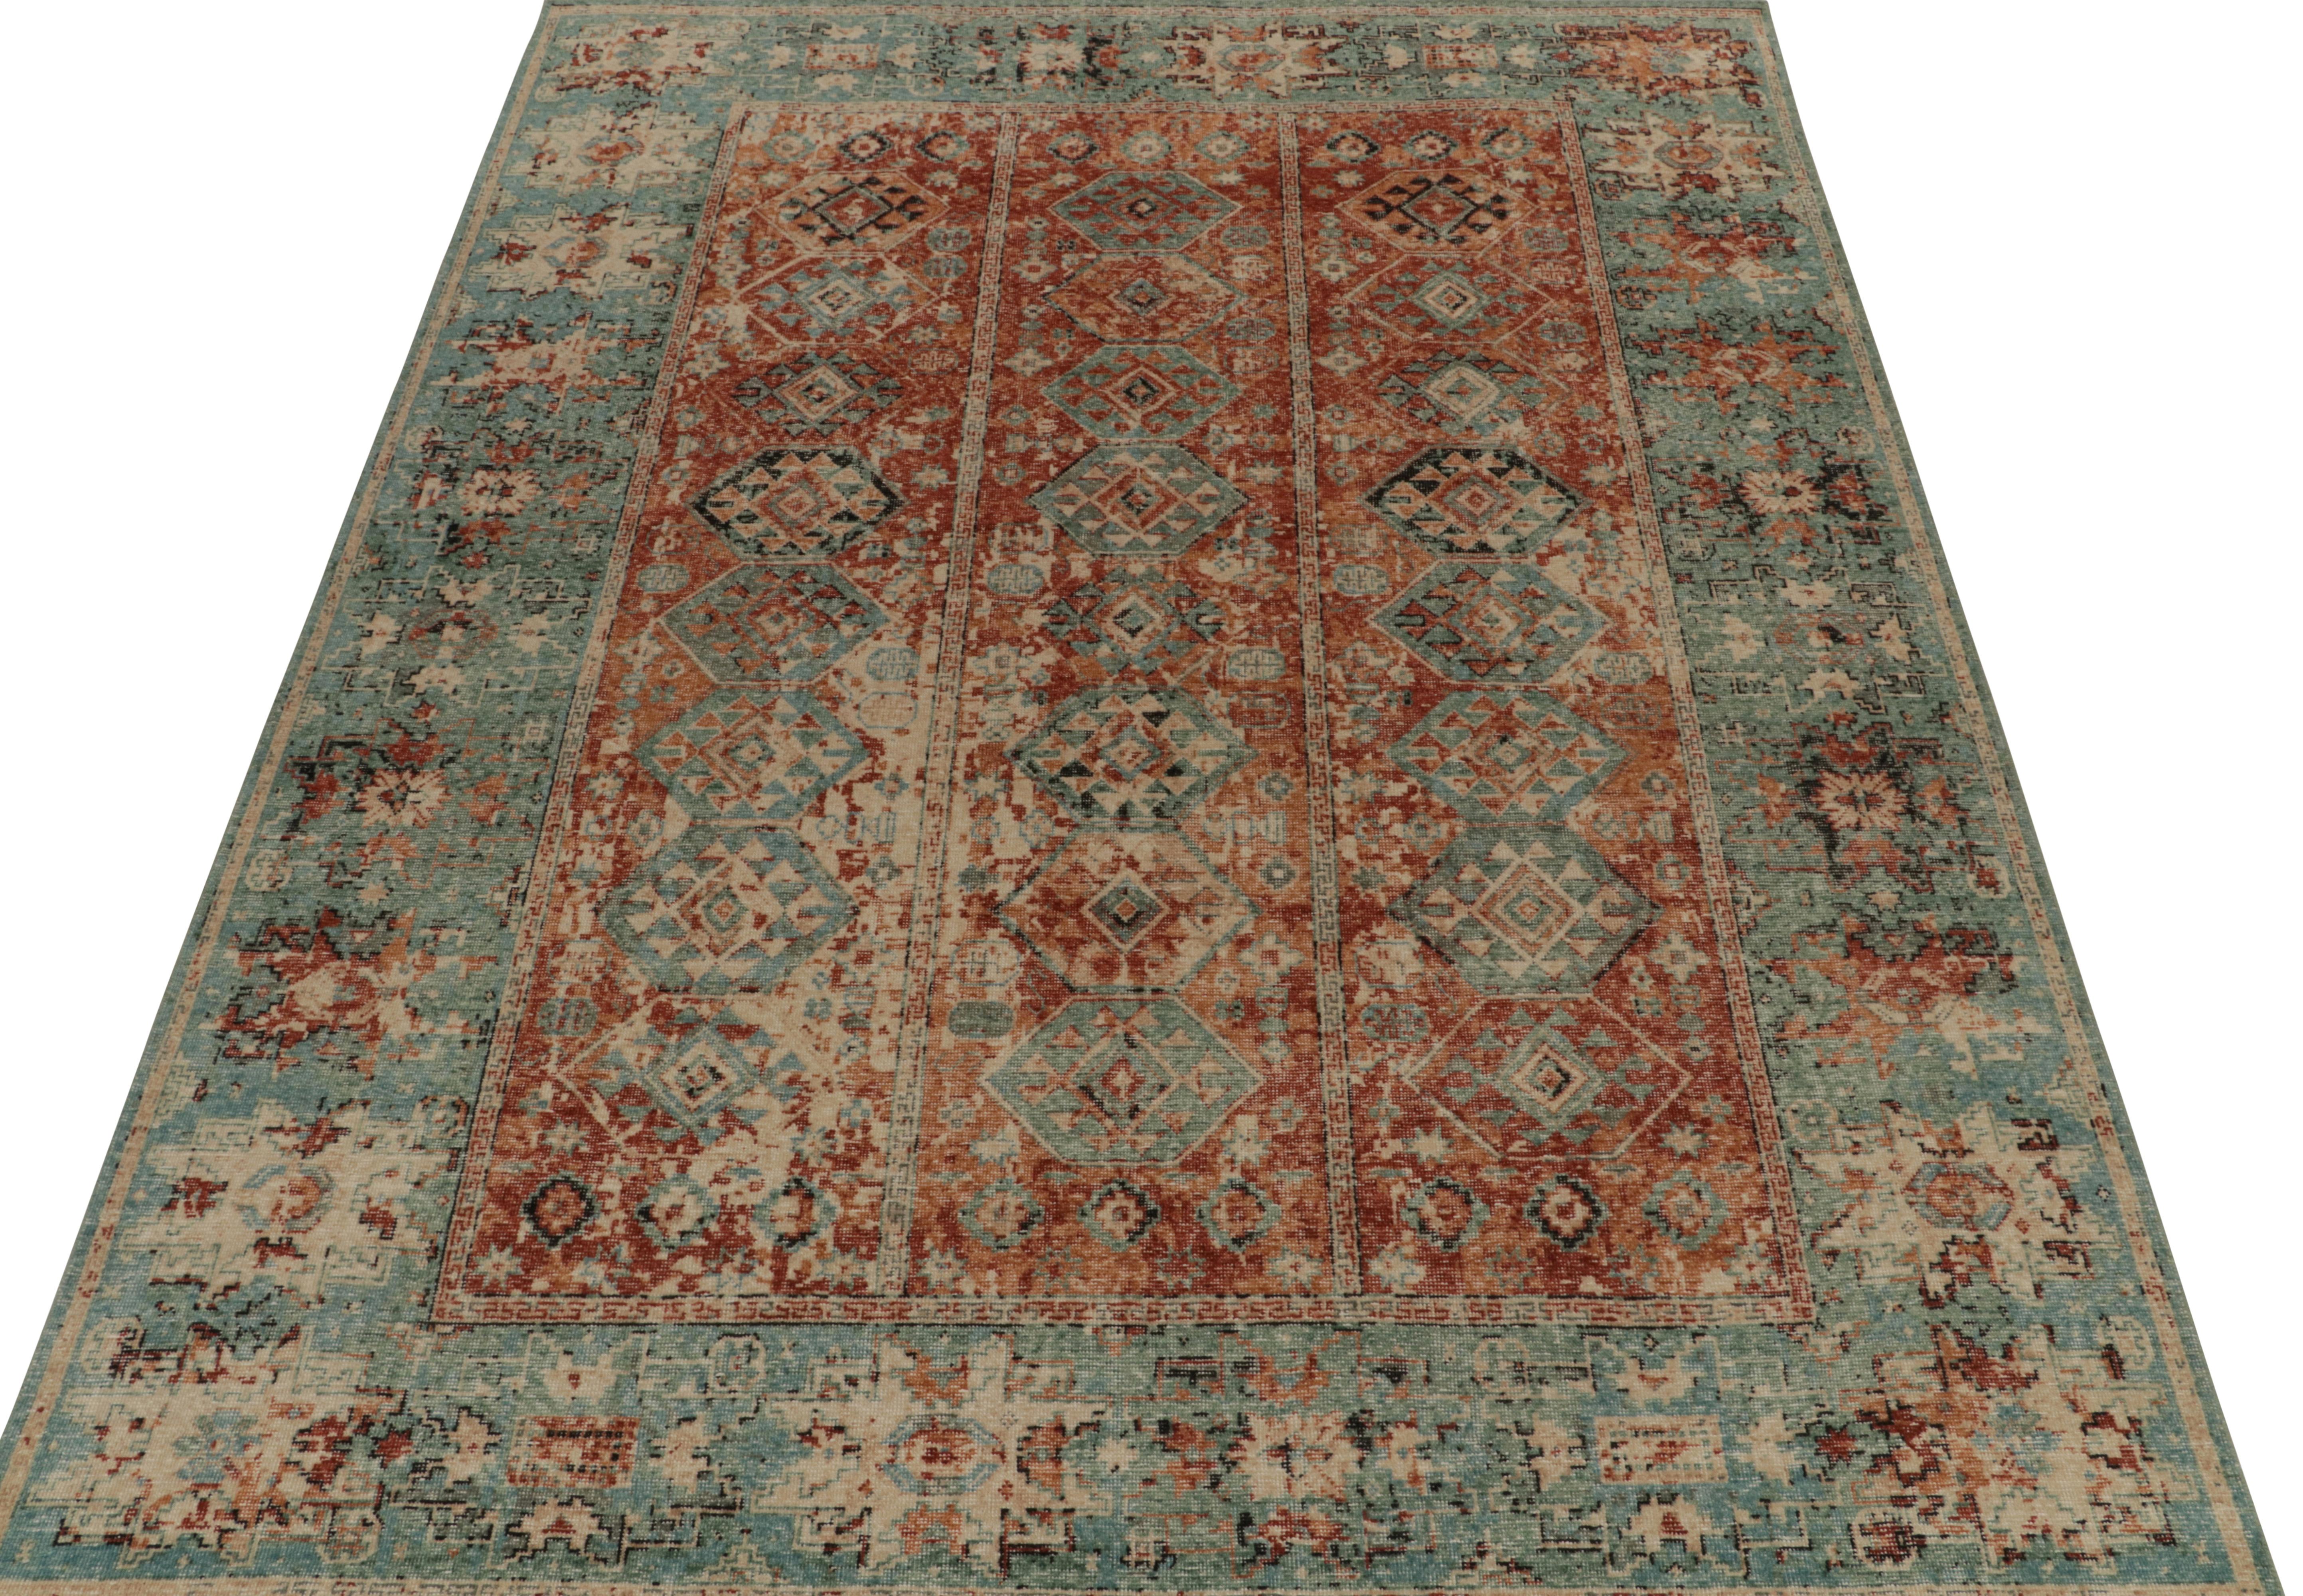 Indian Rug & Kilim’s Distressed Style Rug in Rust, Beige and Teal Tribal Medallions For Sale